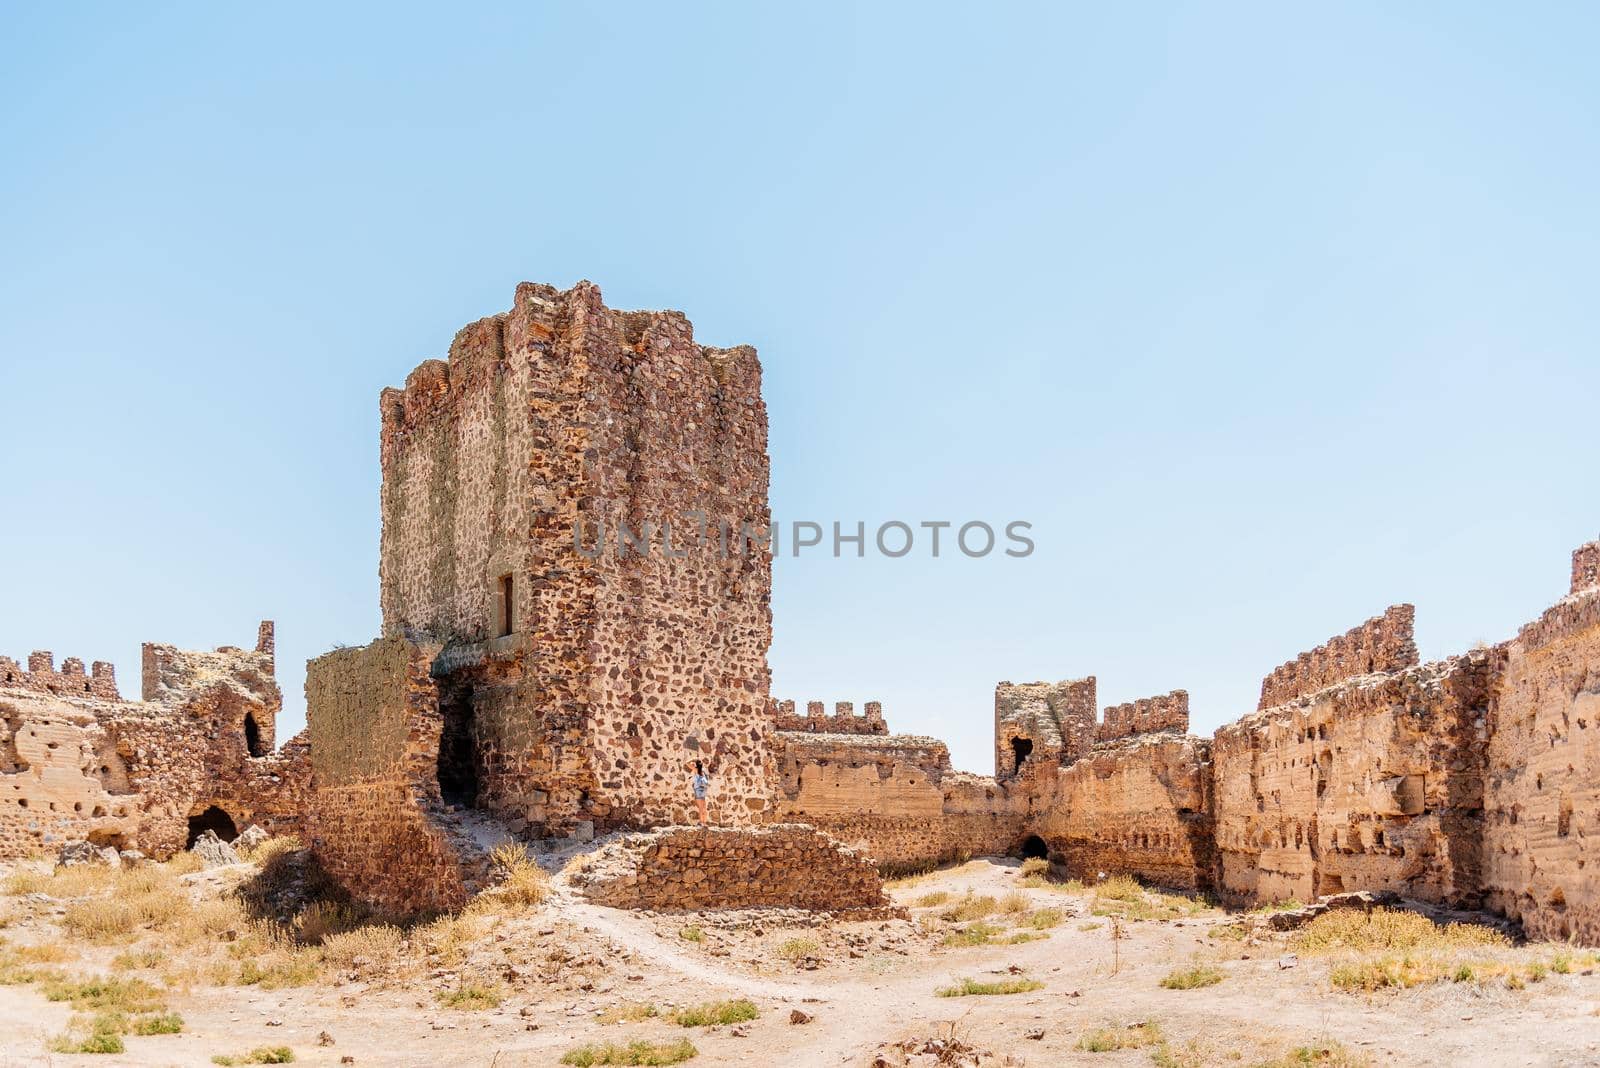 Restored tower in the middle of a ruined medieval castle in a sunny day. Almonacid Castle, in Spain